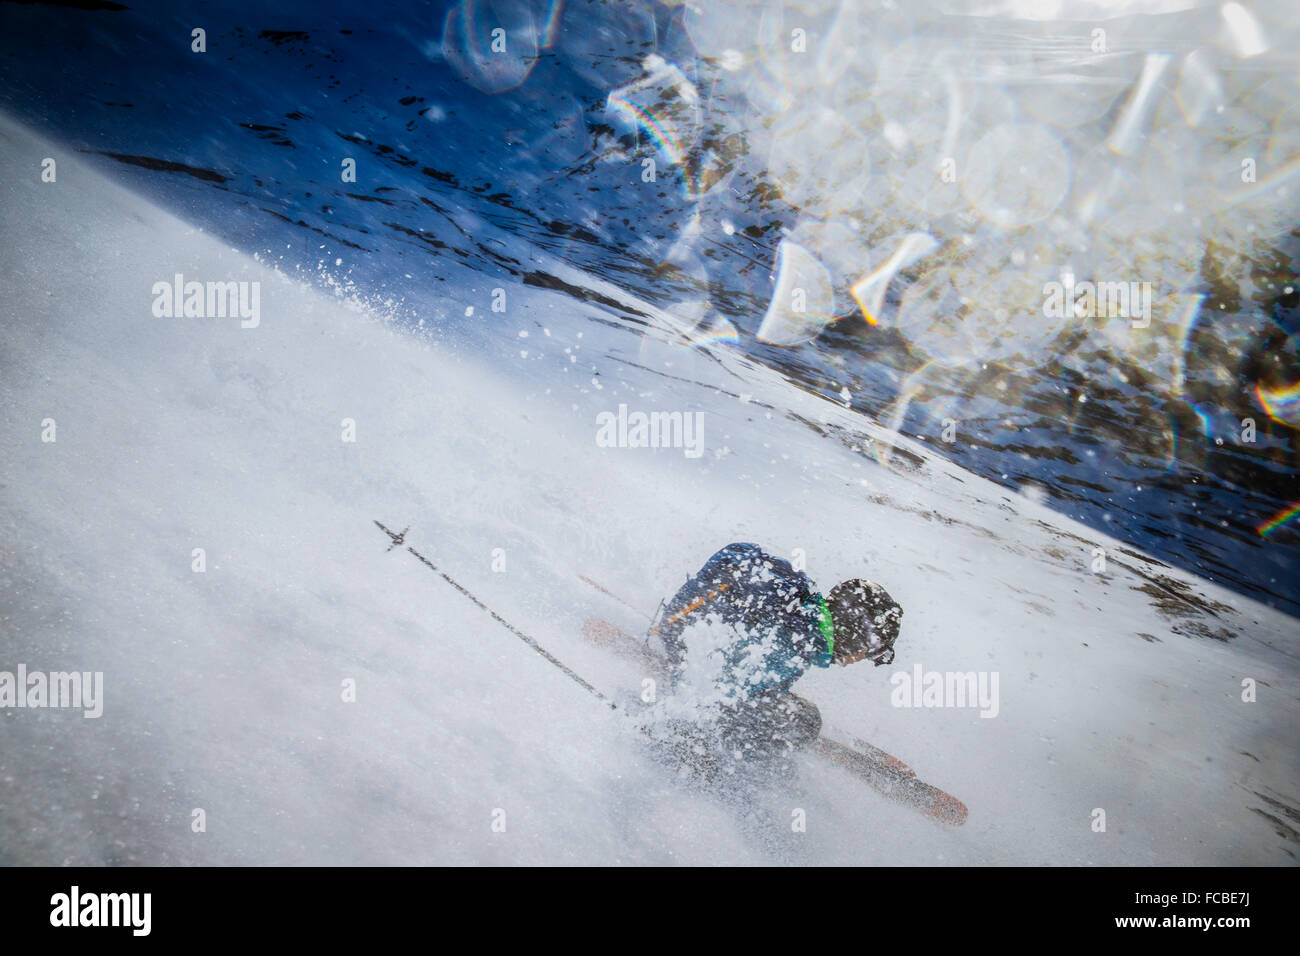 A man skiing on a very very windy day. Stock Photo